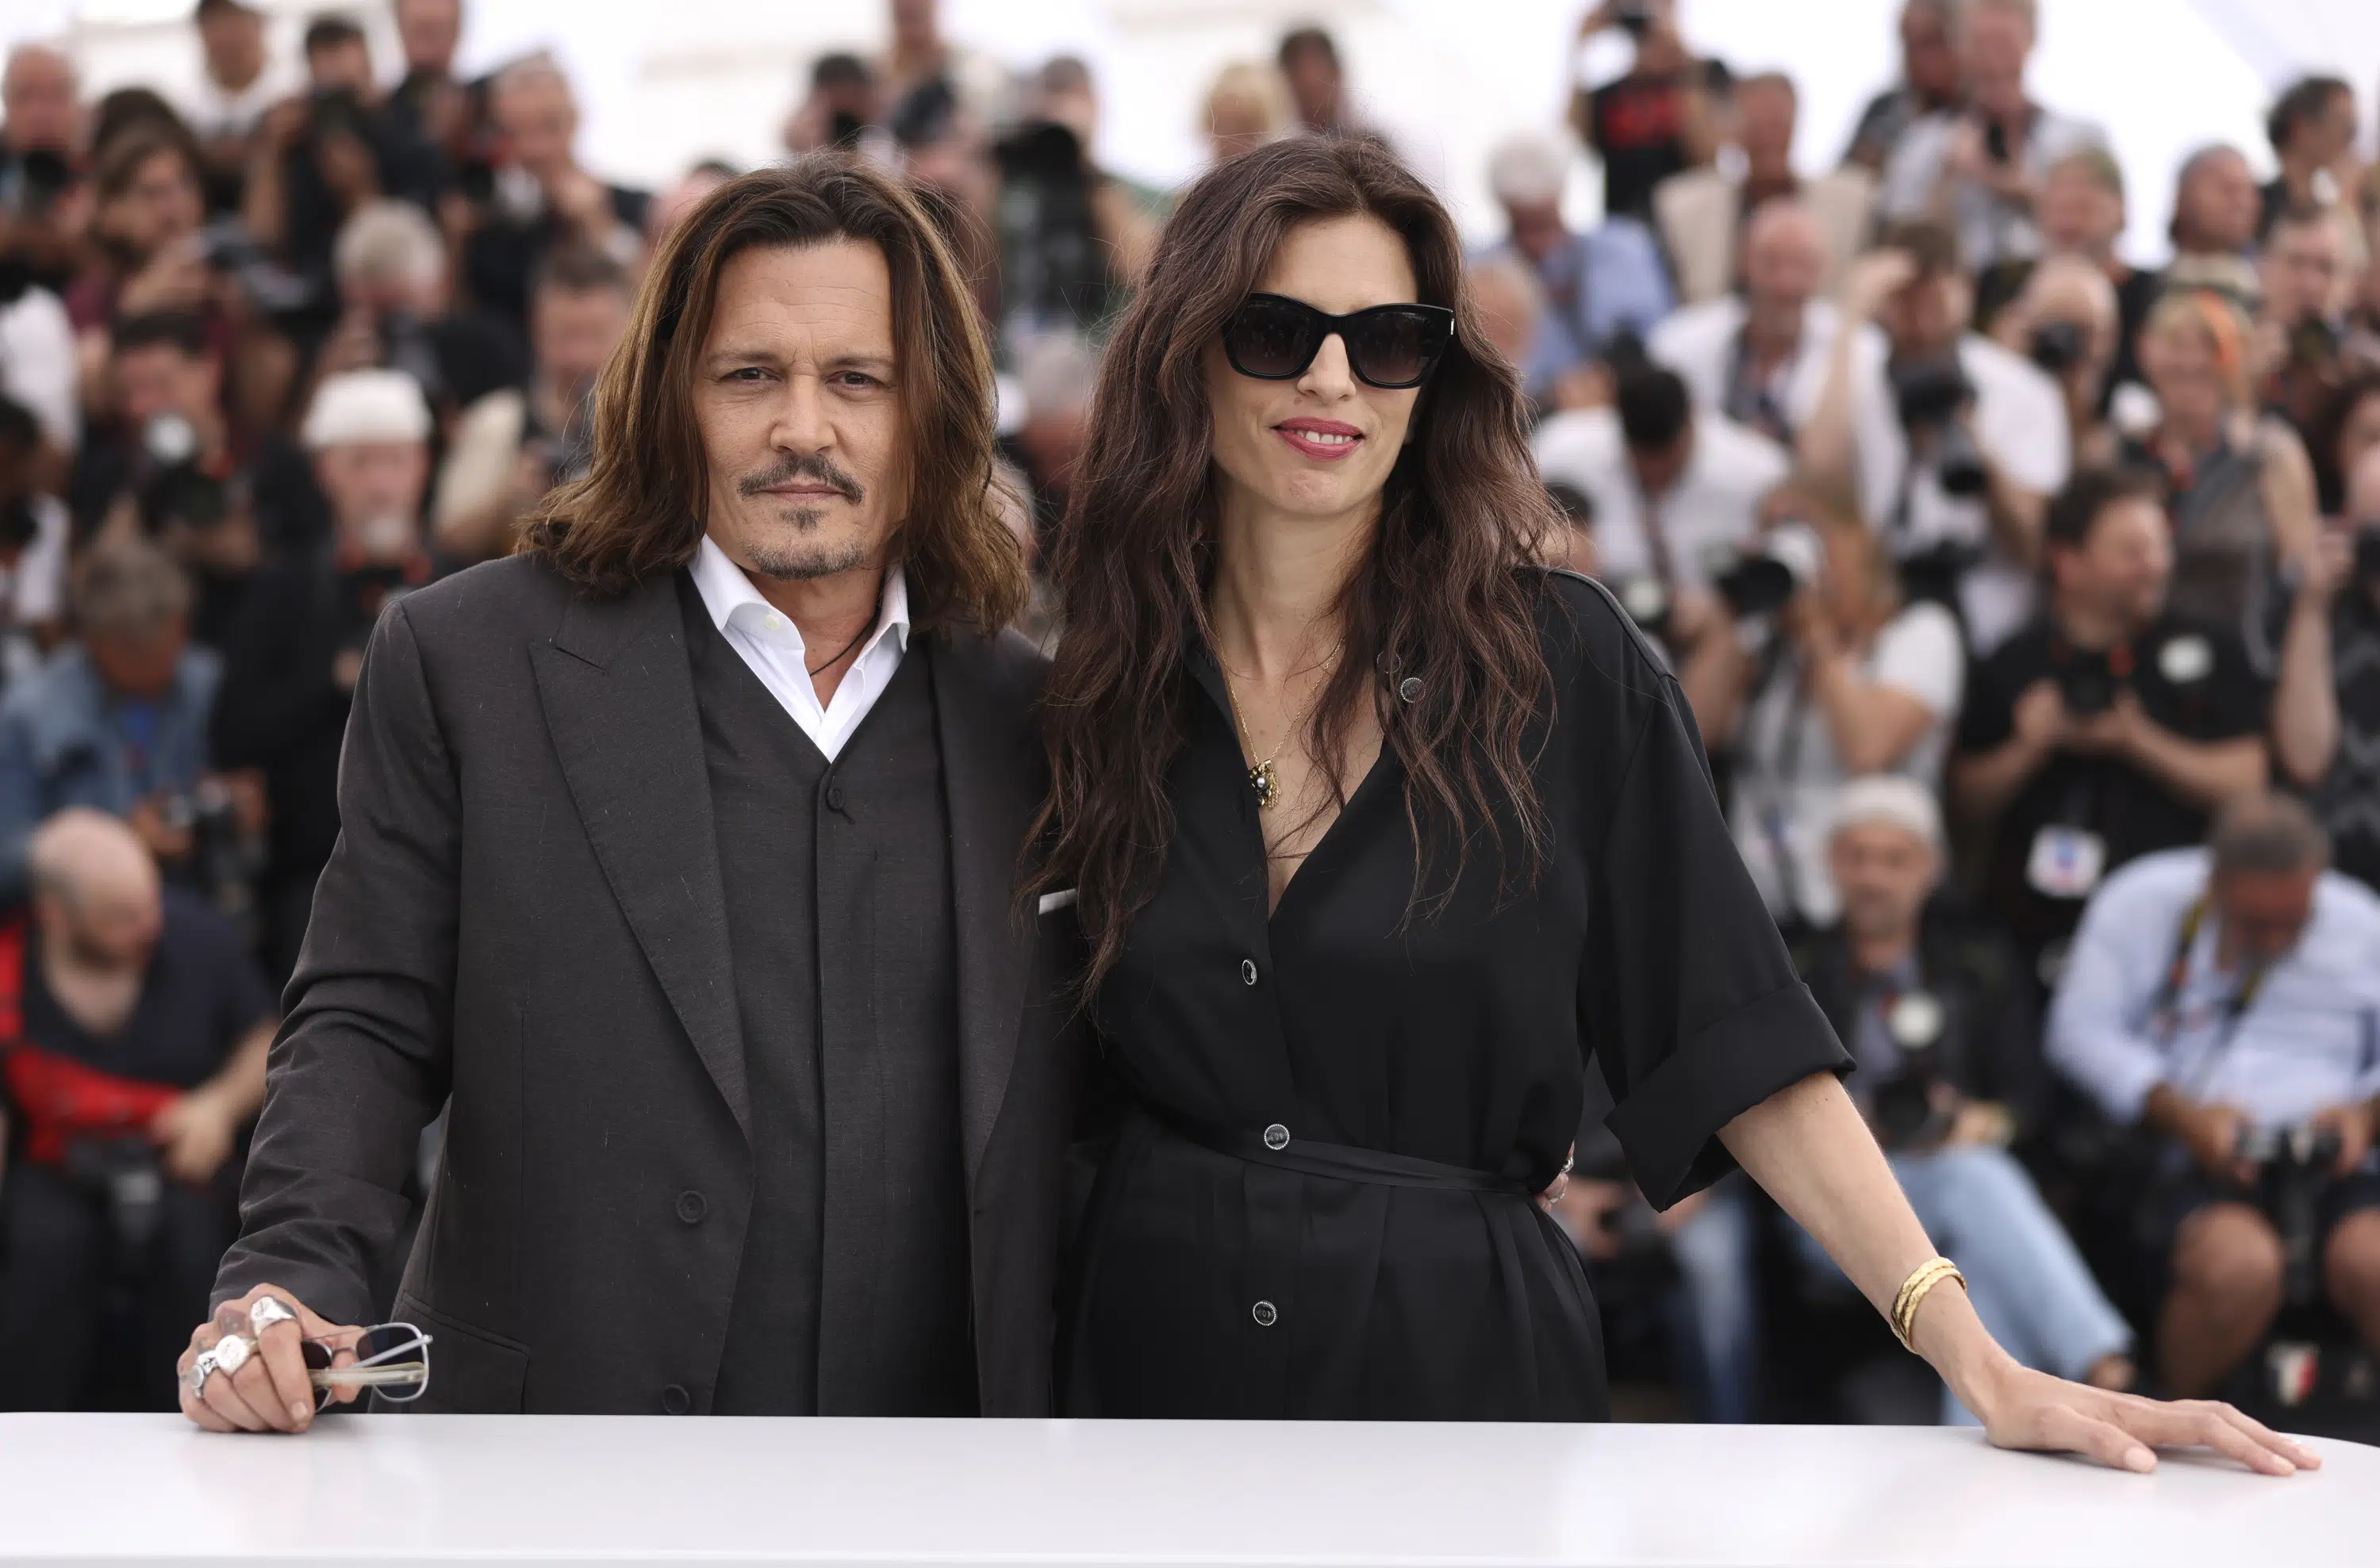 At Cannes Film Festival, Johnny Depp says ‘I have no further need for Hollywood’